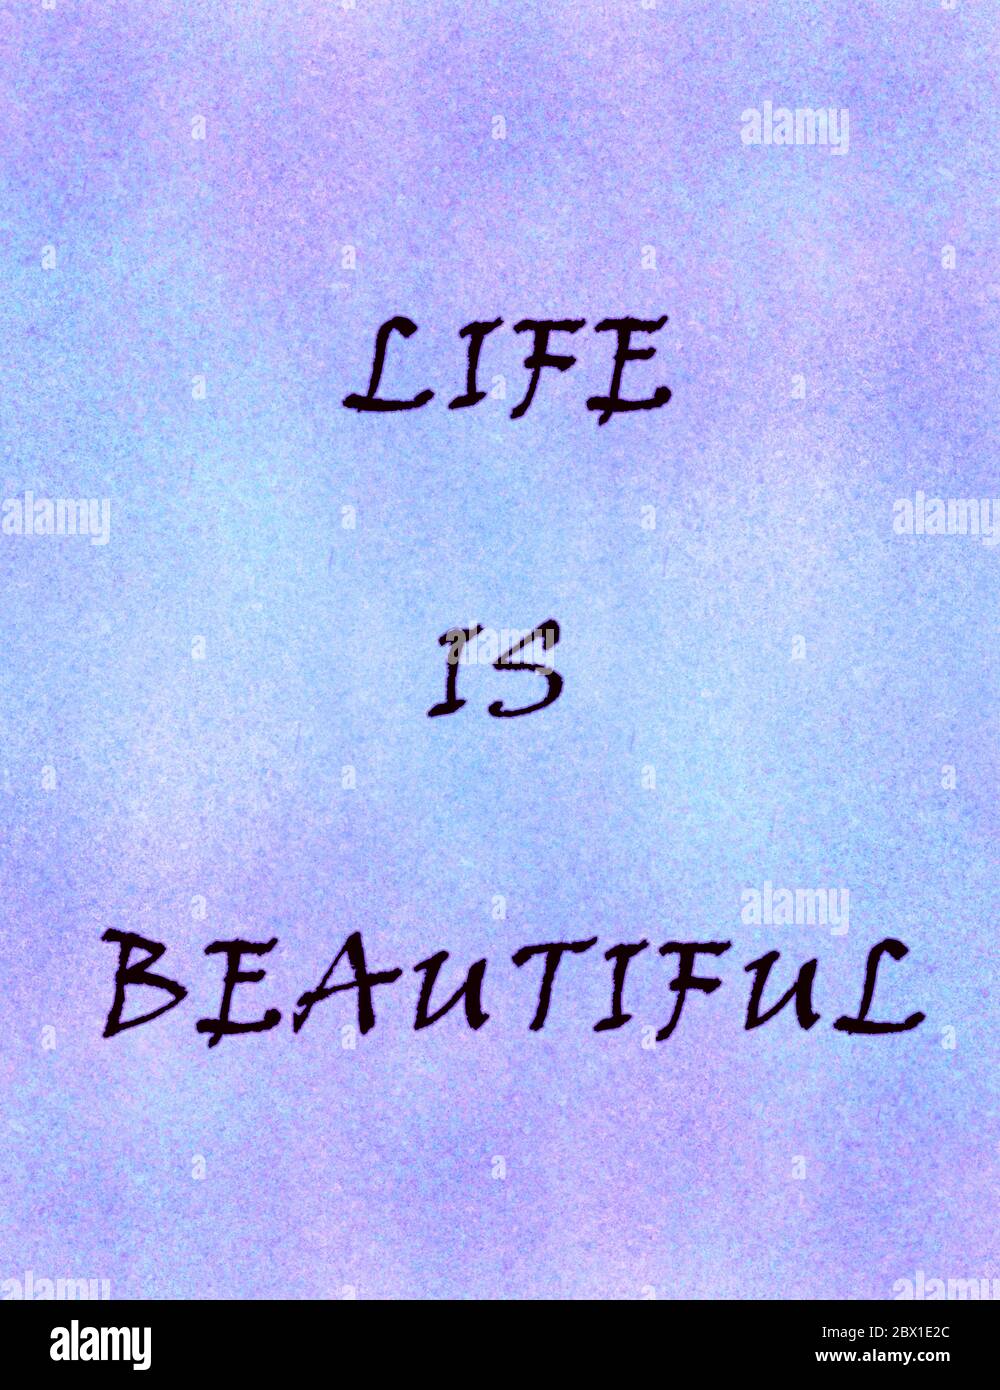 Life Is Beautiful-Text On Watery Colored Background. An Inspiring